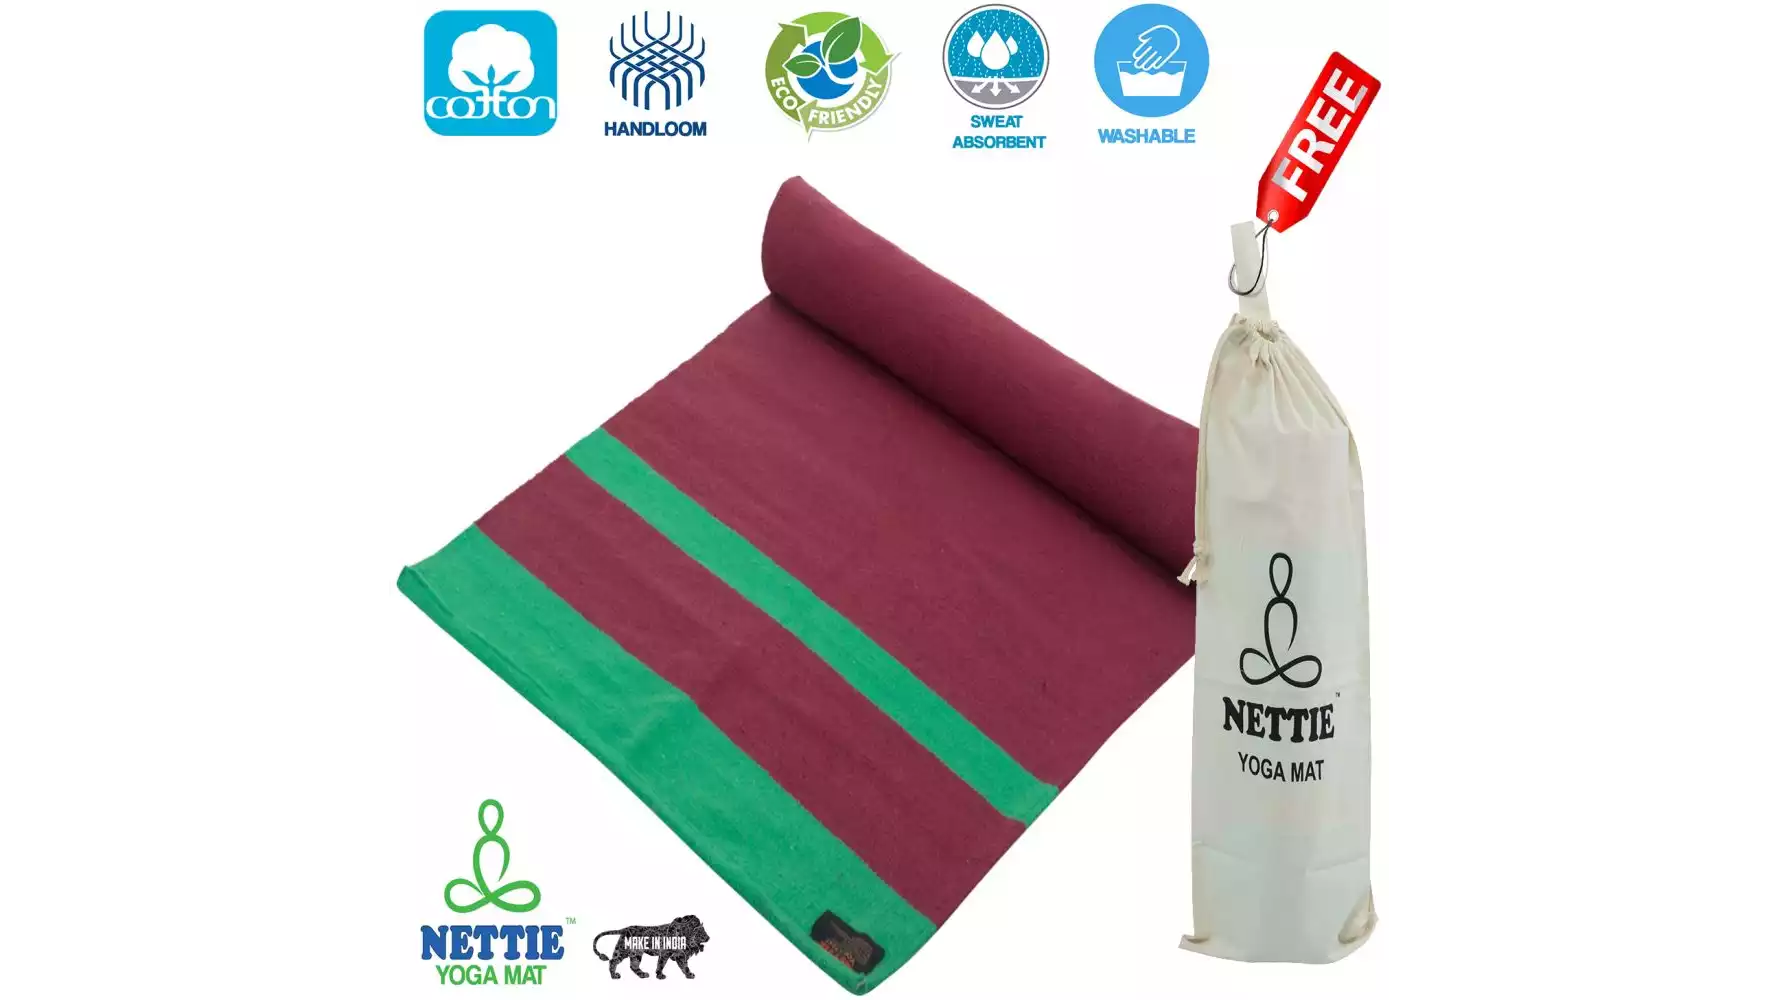 Nettie Handloom Cotton Yoga Mat (Maroon & Green Standard Size With Free Cotton Carry Bag) (1pcs)